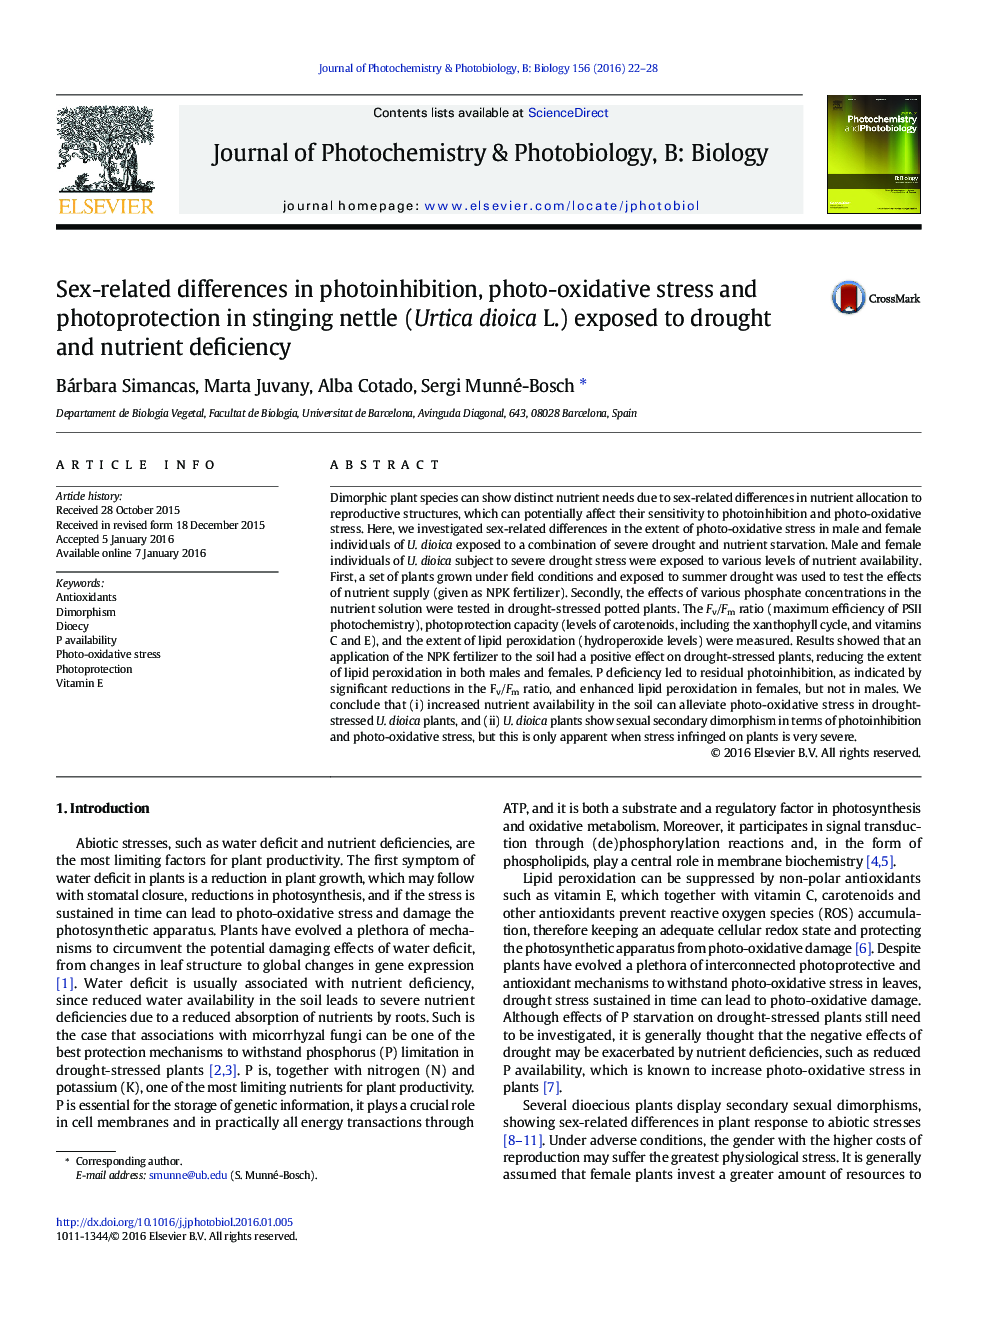 Sex-related differences in photoinhibition, photo-oxidative stress and photoprotection in stinging nettle (Urtica dioica L.) exposed to drought and nutrient deficiency